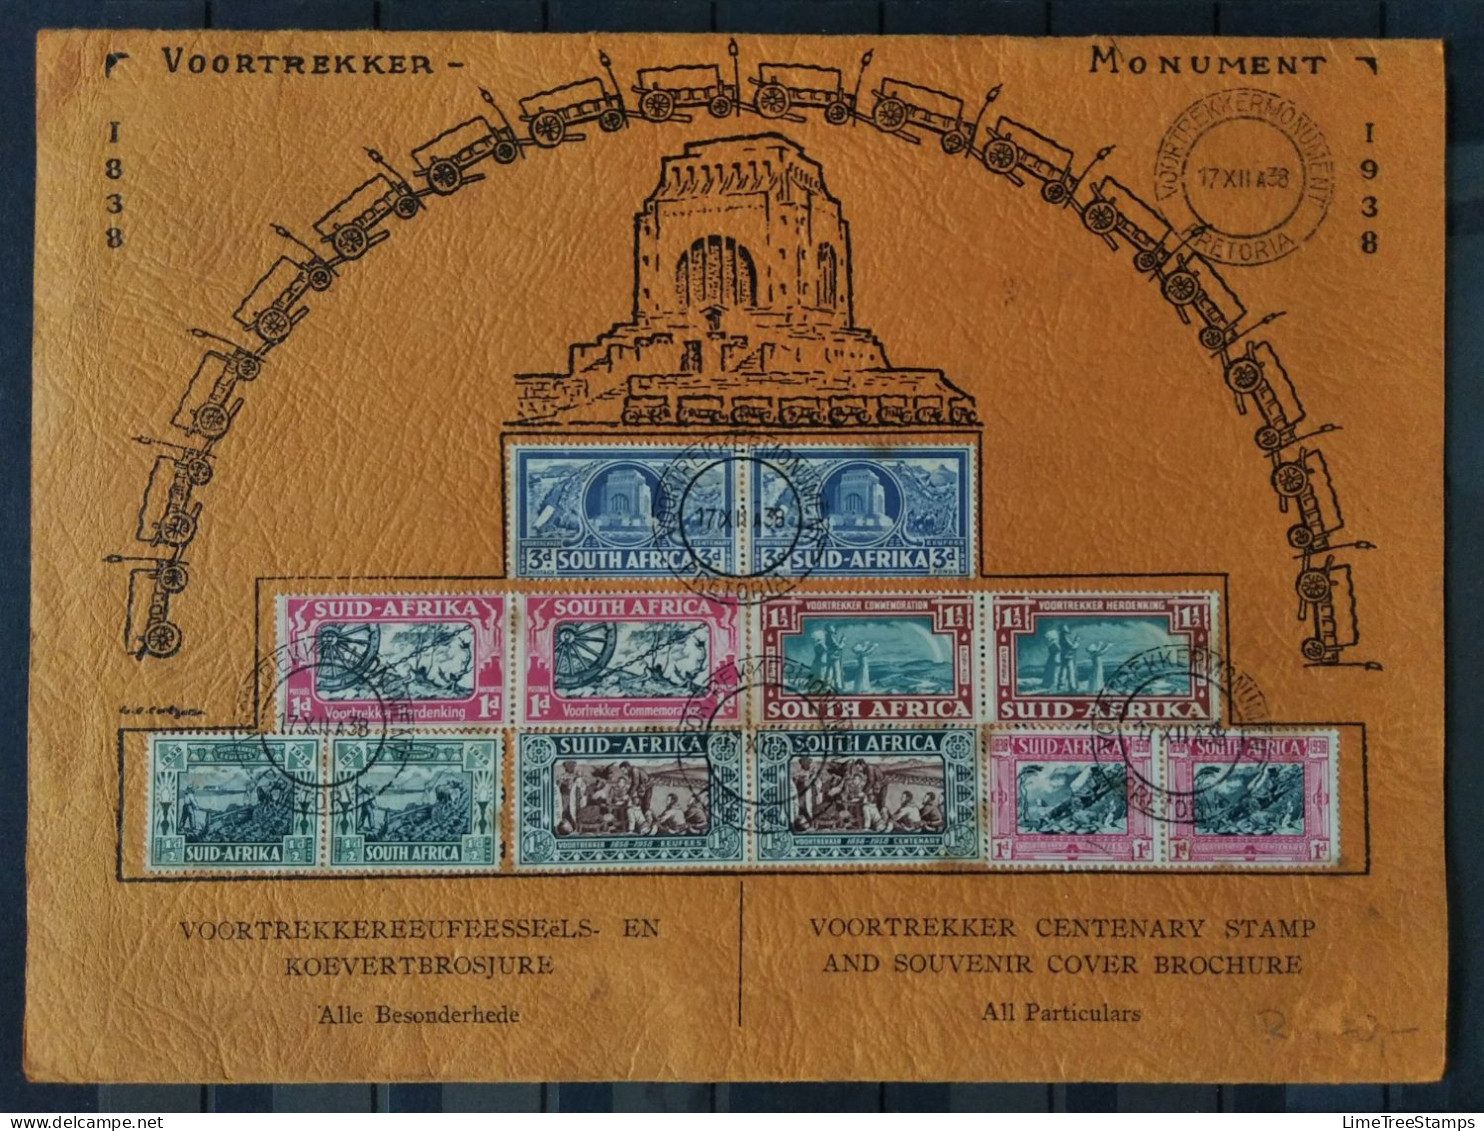 SOUTH AFRICA Original 1938 Voortrekker Centenary Stamp And Souvenir Cover Brochure With Program - Lettres & Documents